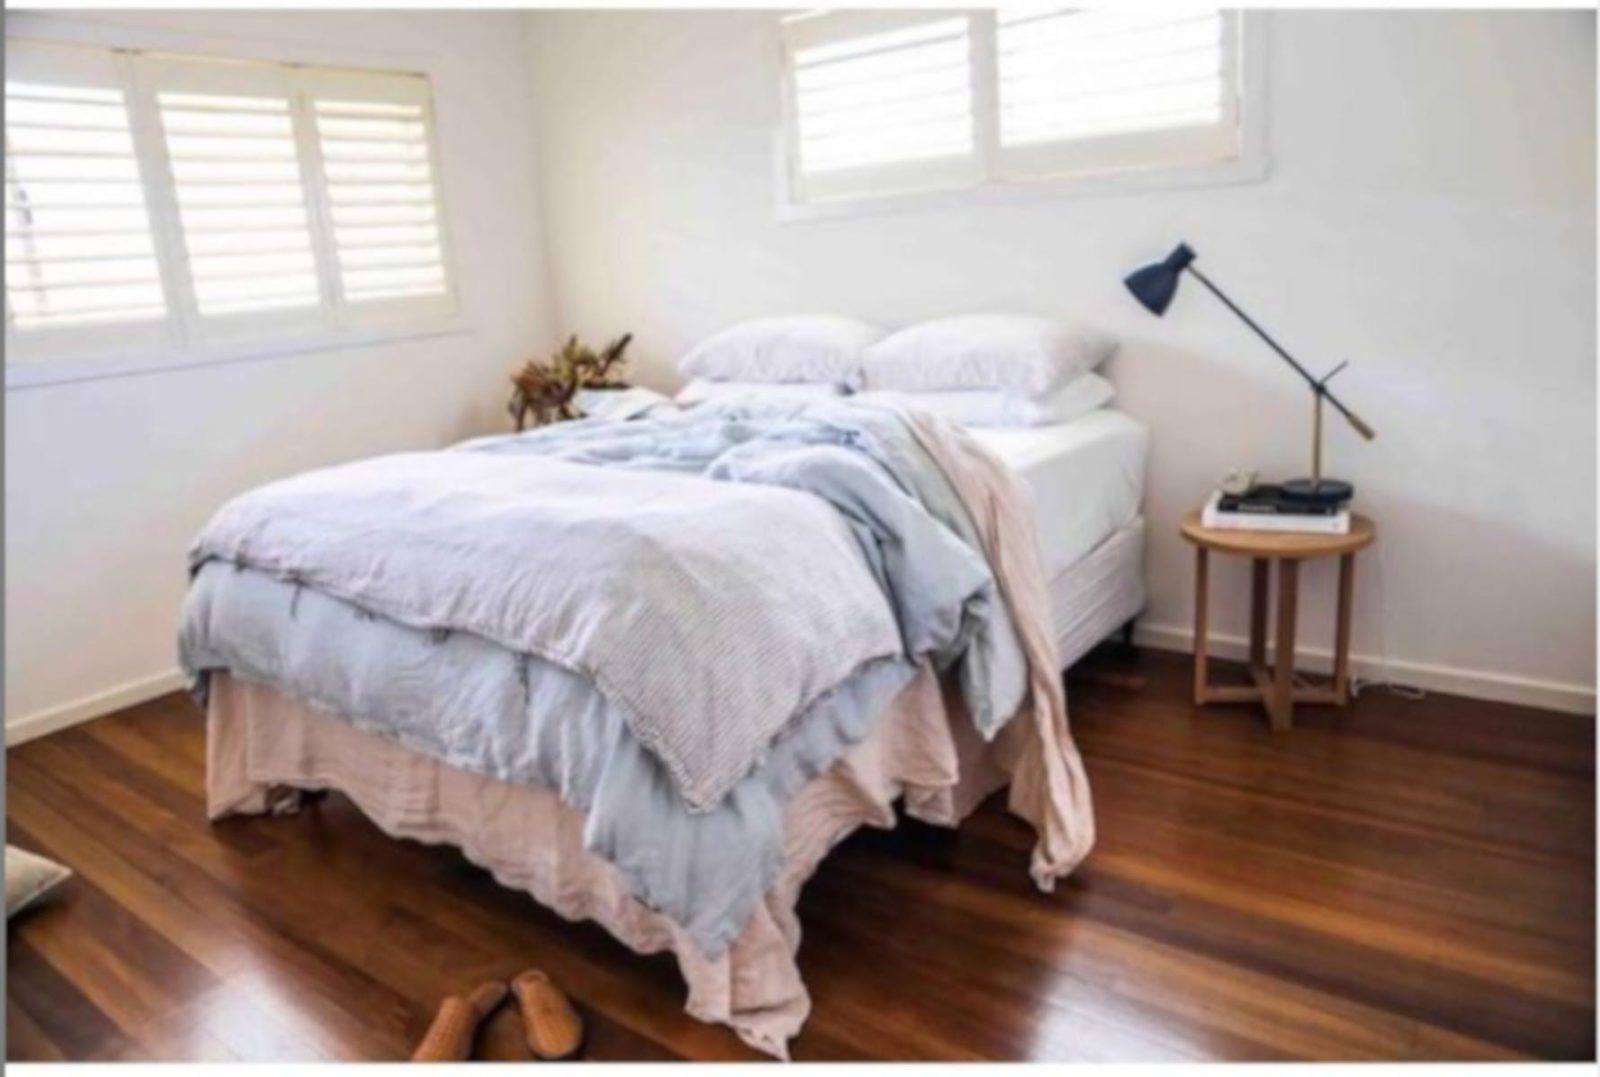 bedroom photo a beautiful comfy bed in a light filled room with timber floors